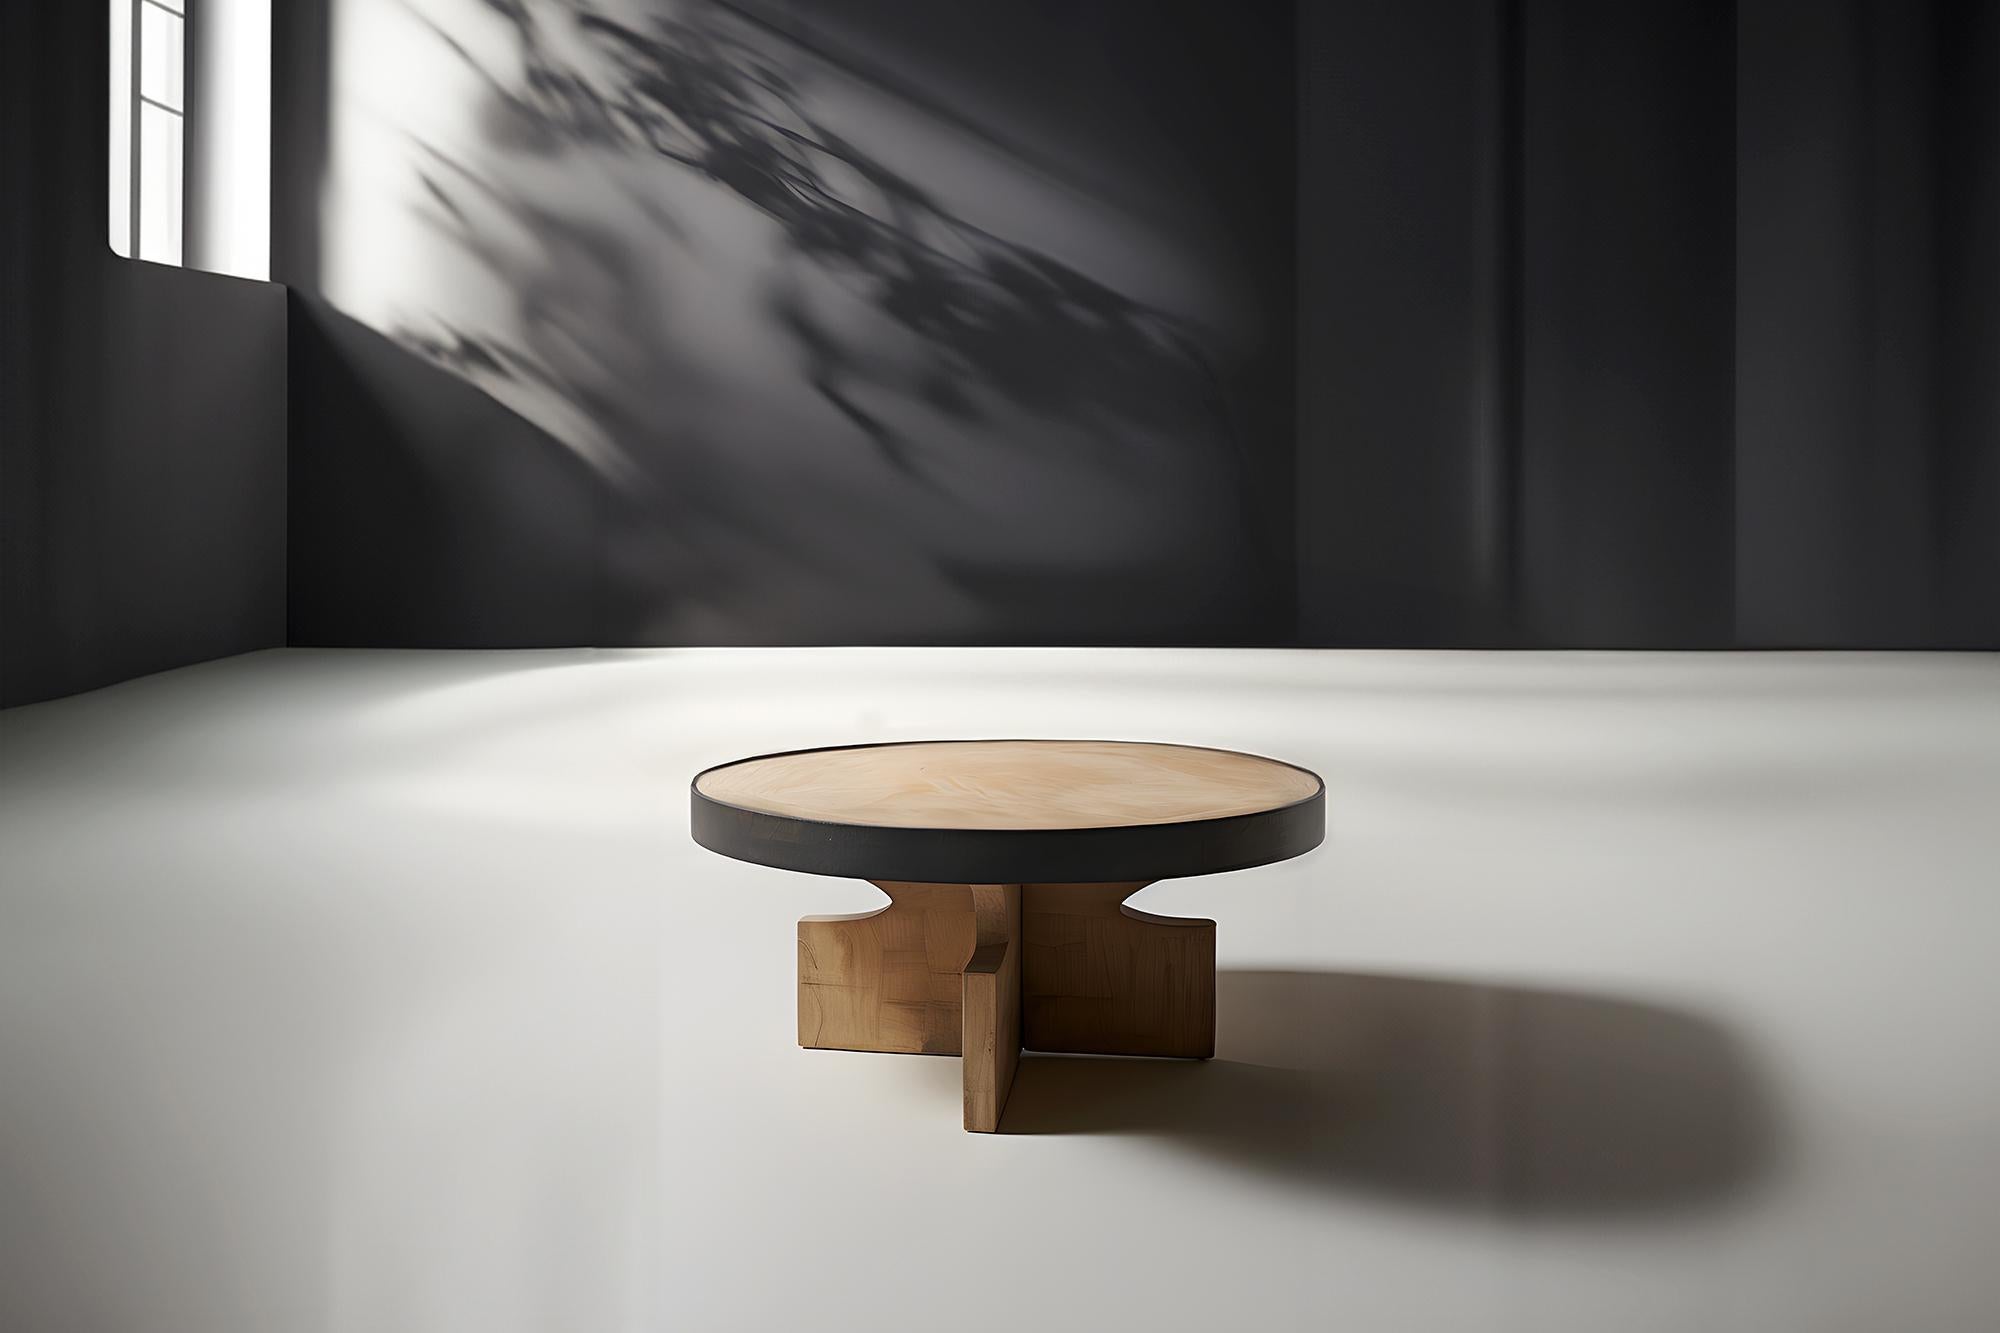 Fundamenta Round Side Table 60 Solid Wood, Geometric Elegance by NONO
Sculptural coffee table made of solid wood with a natural water-based or black tinted finish. Due to the nature of the production process, each piece may vary in grain, texture,